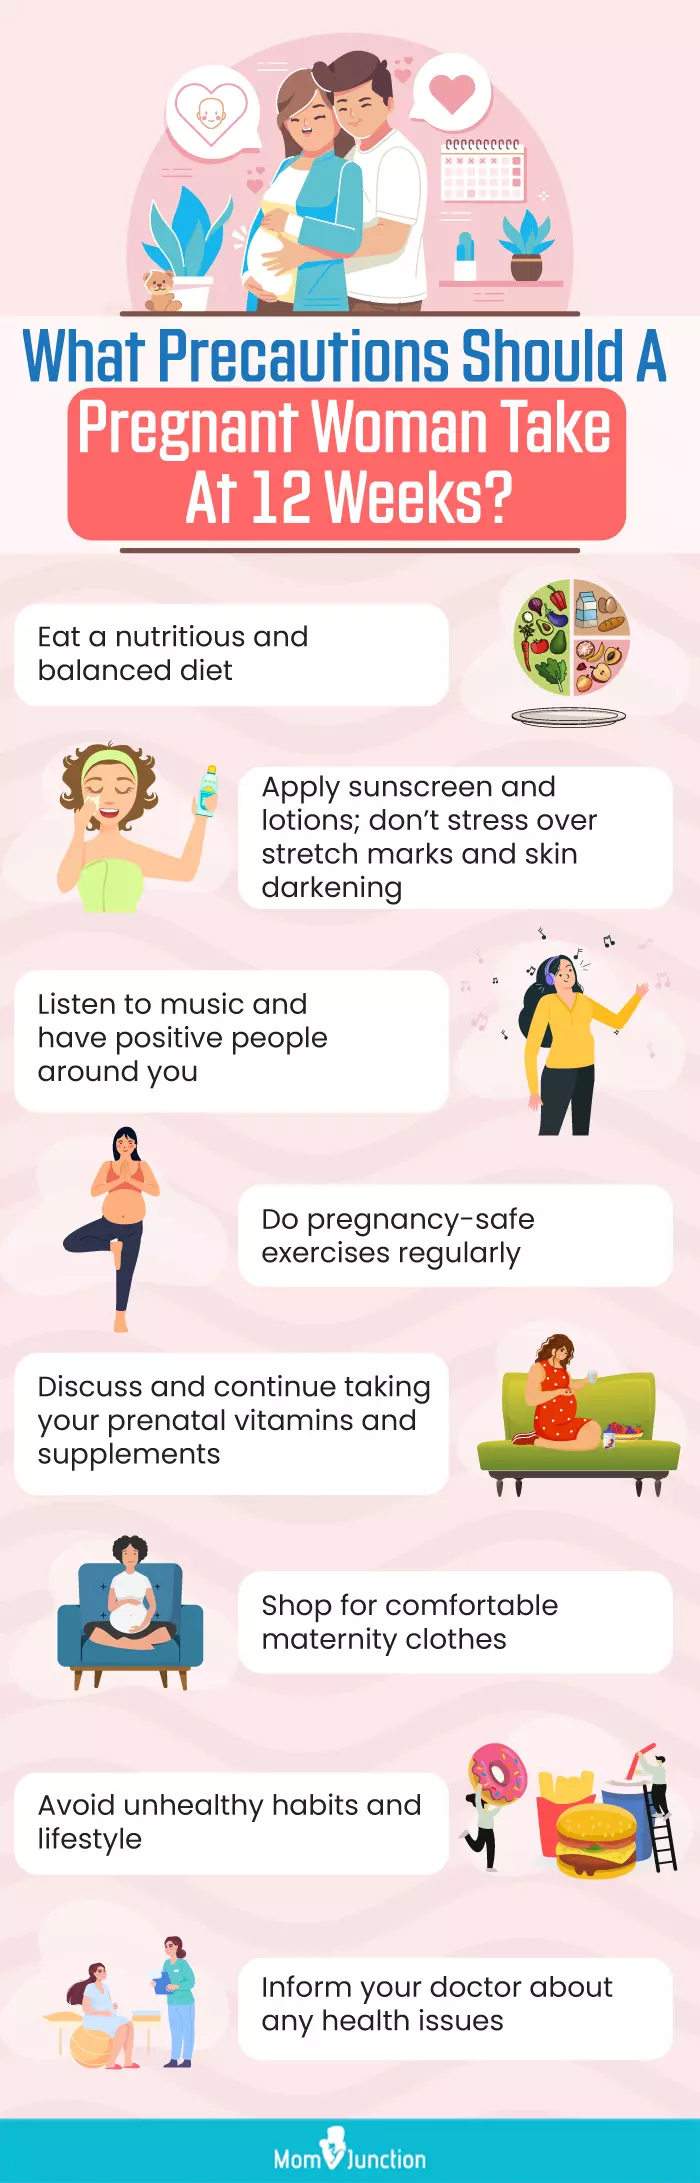 what precautions should a pregnant woman take at 12 weeks (infographic)